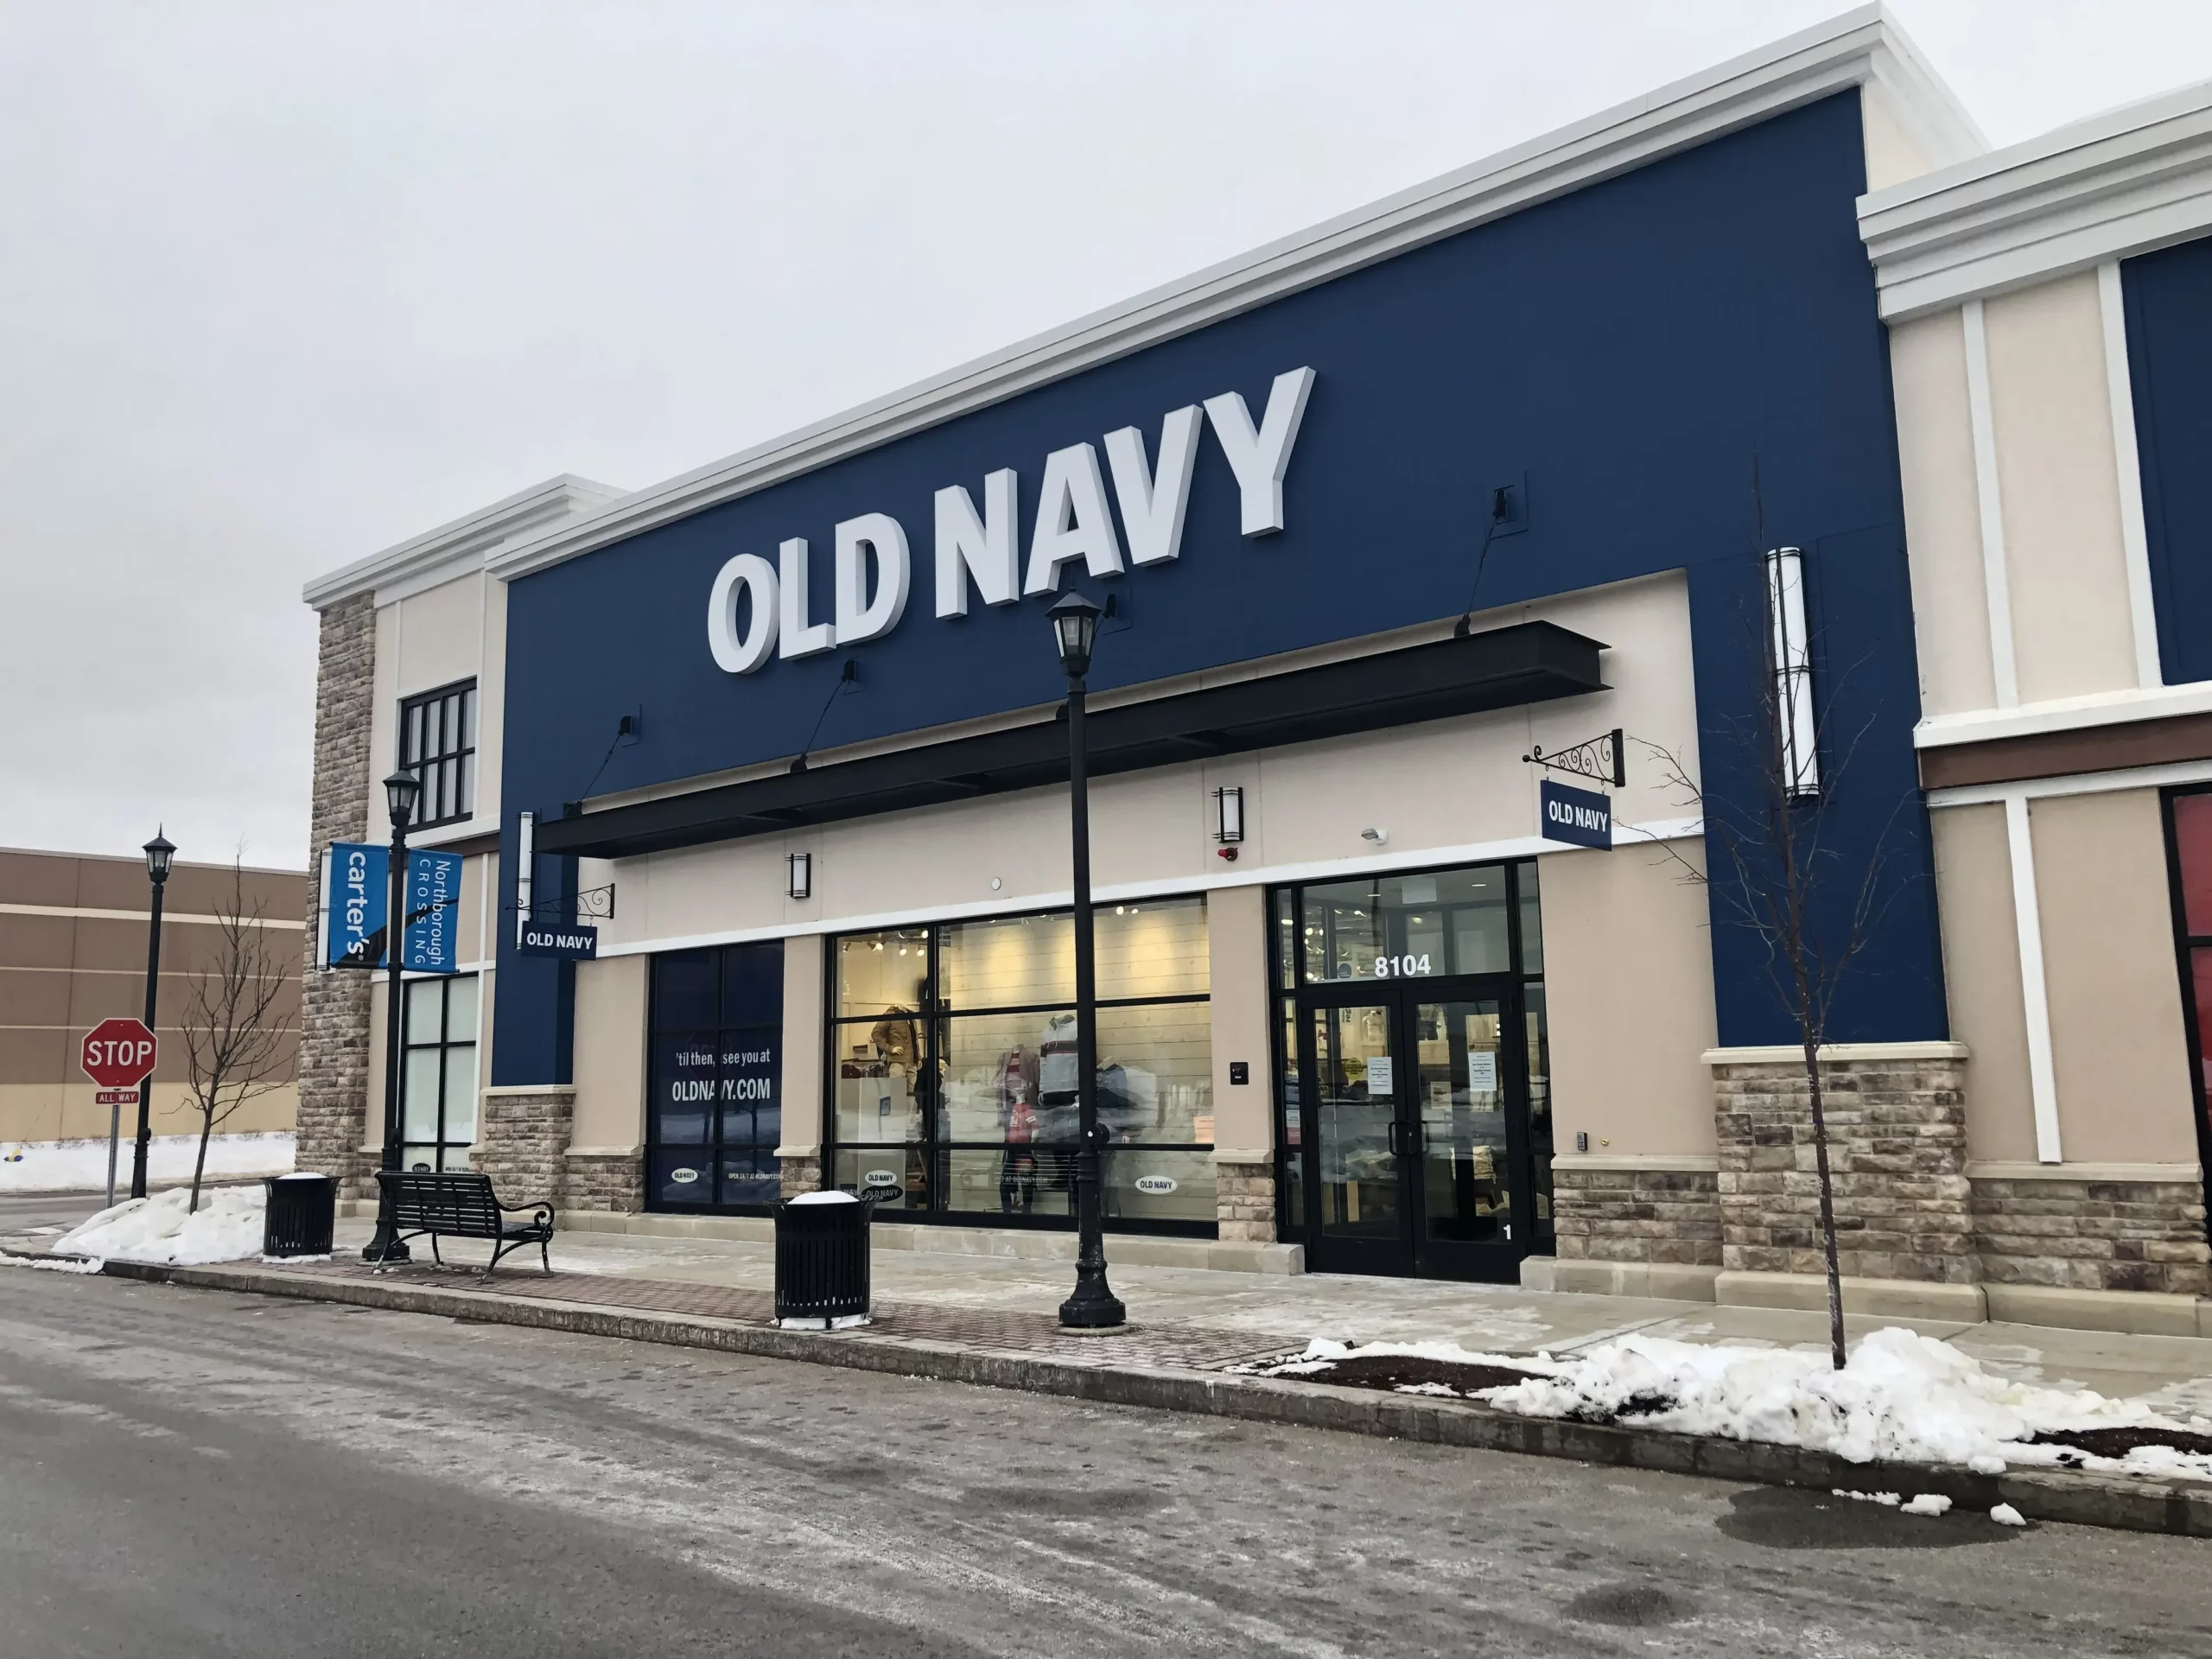 How to Find Old Navy Hours